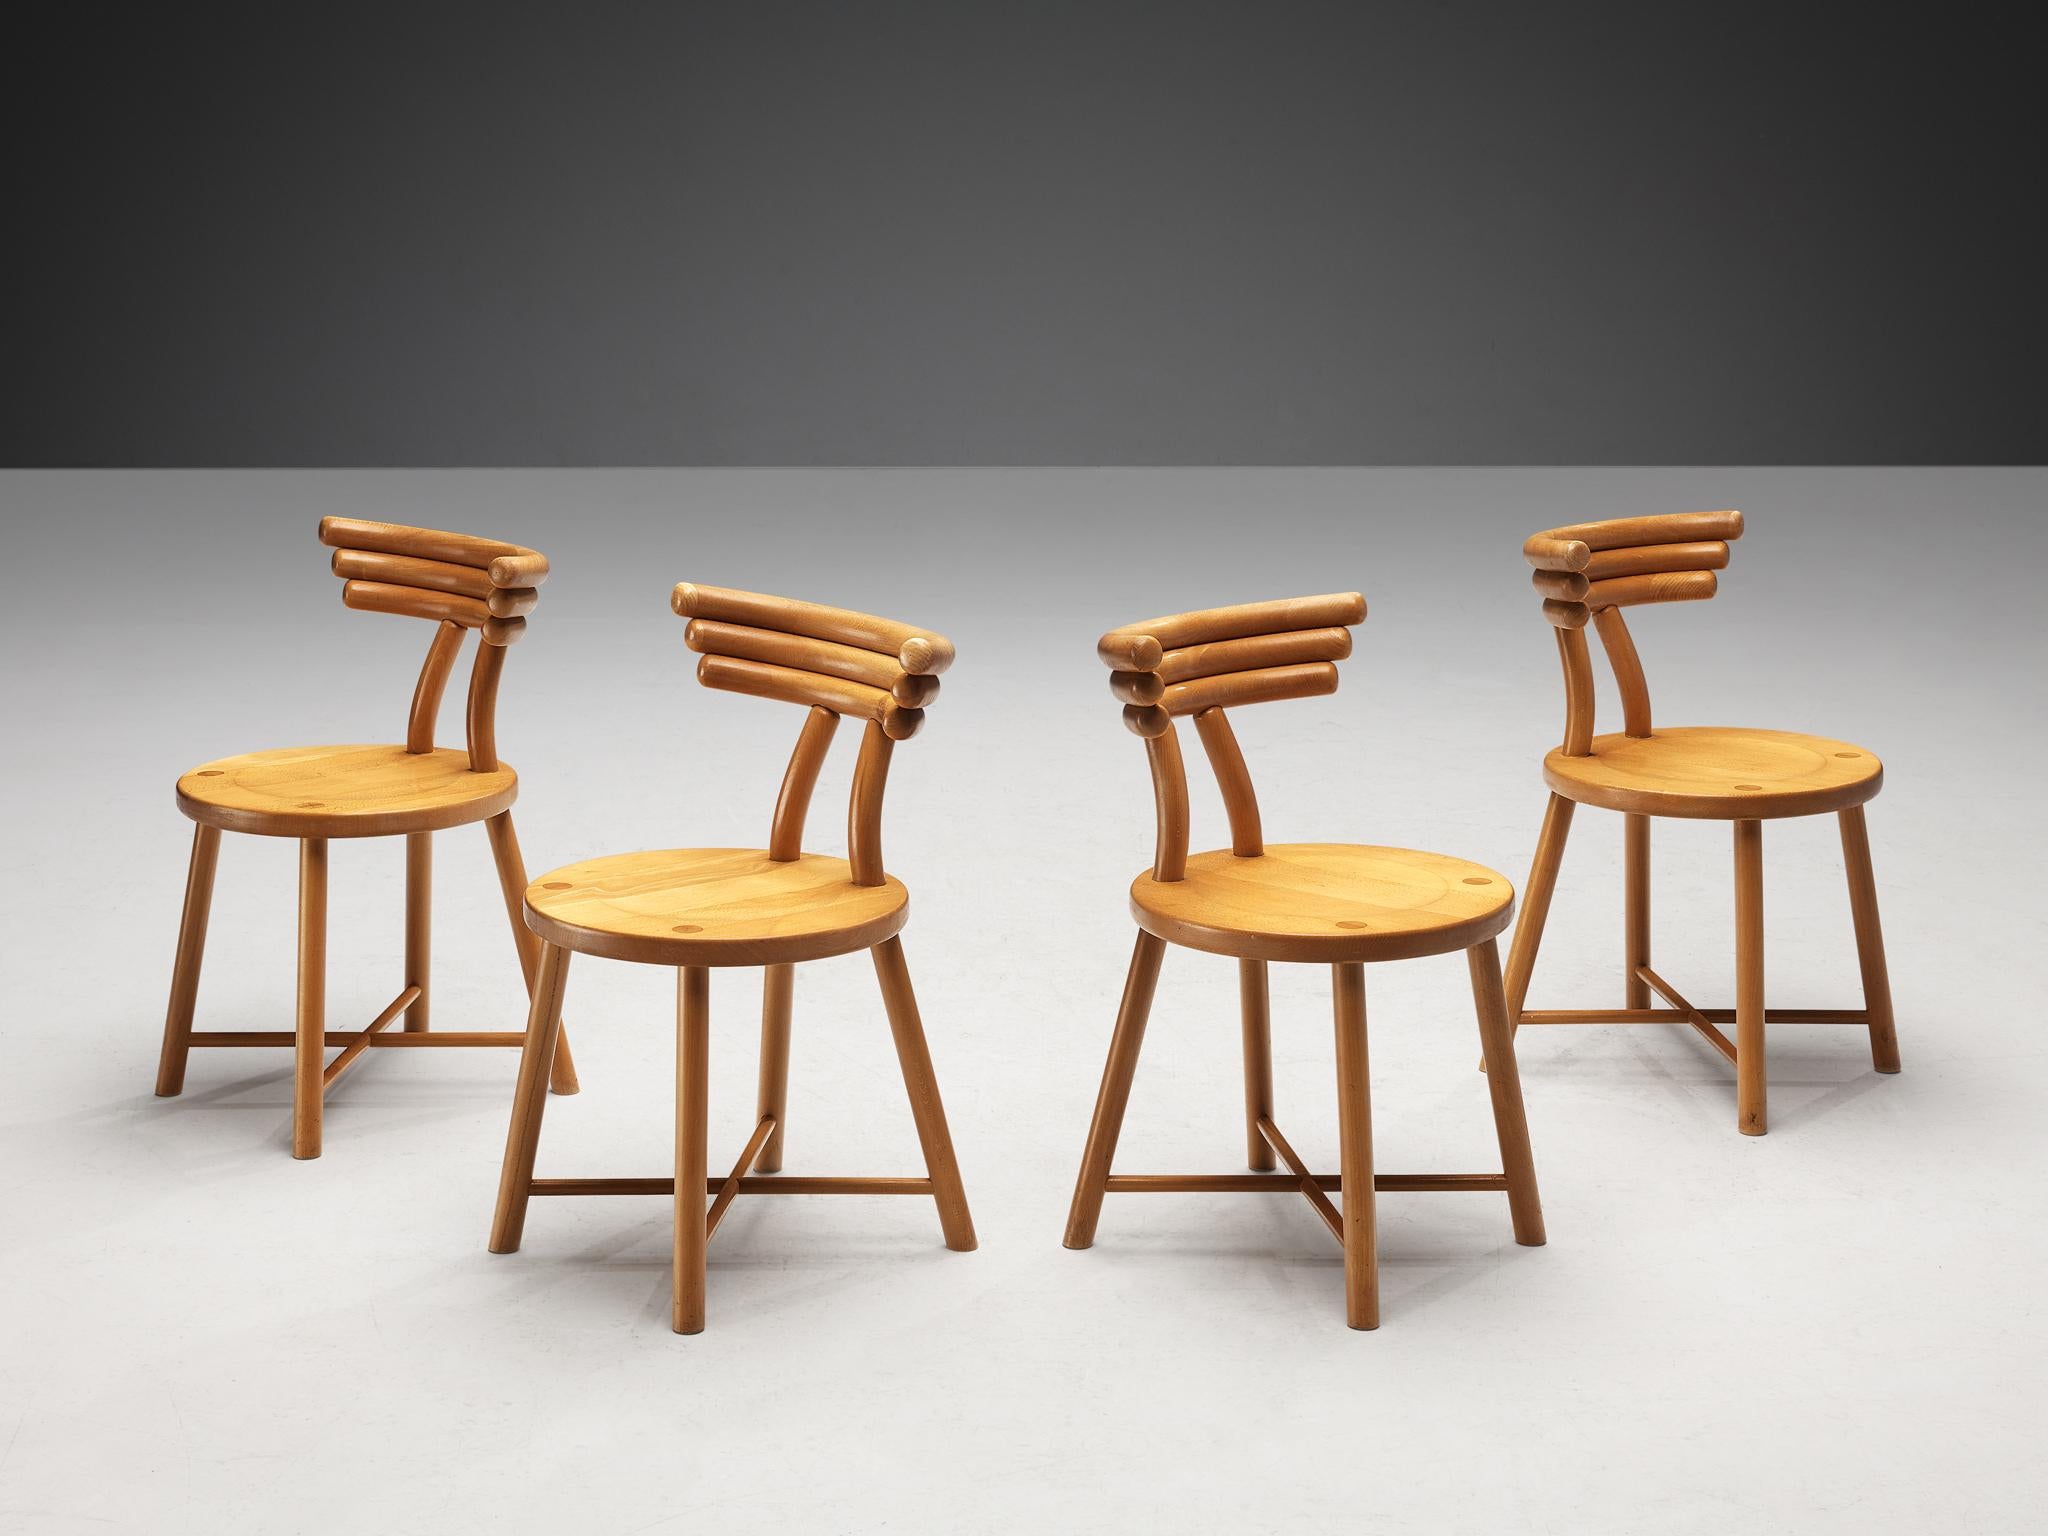 Set of four dining chairs, beech, Germany, 1970s. 

Great visually interesting set of dining chairs made in Germany in the 1970s. This design shows an interesting construction of the backrest, which is composed of stacked round slats that give these